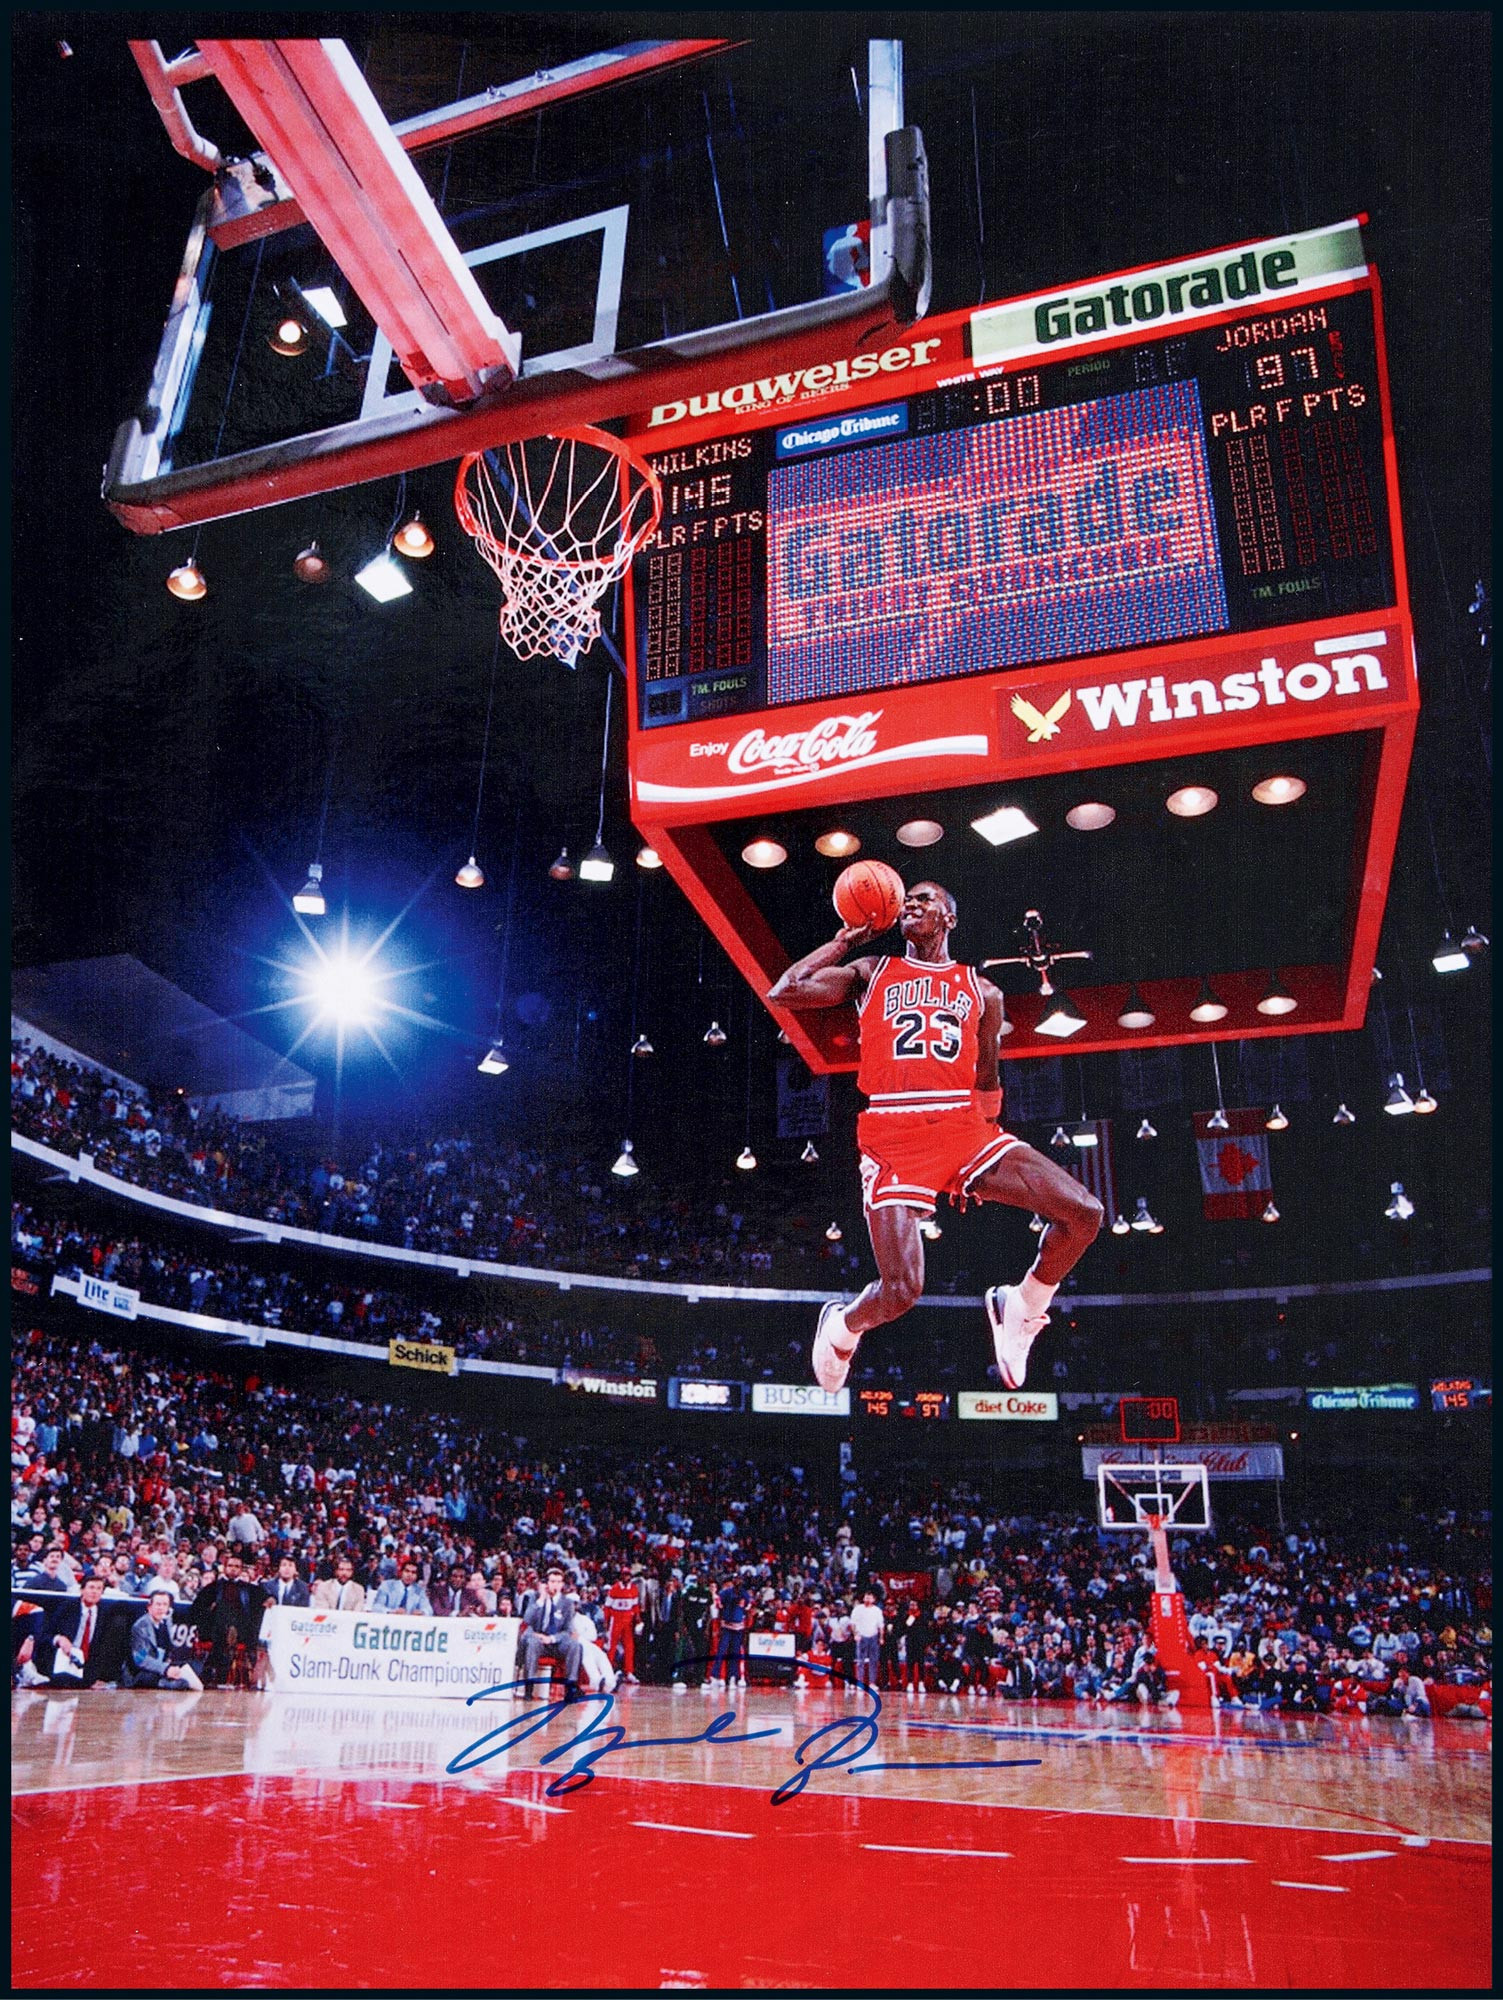 The autographed photo of Michael Jordan, the “Air Jordan”, with certificate